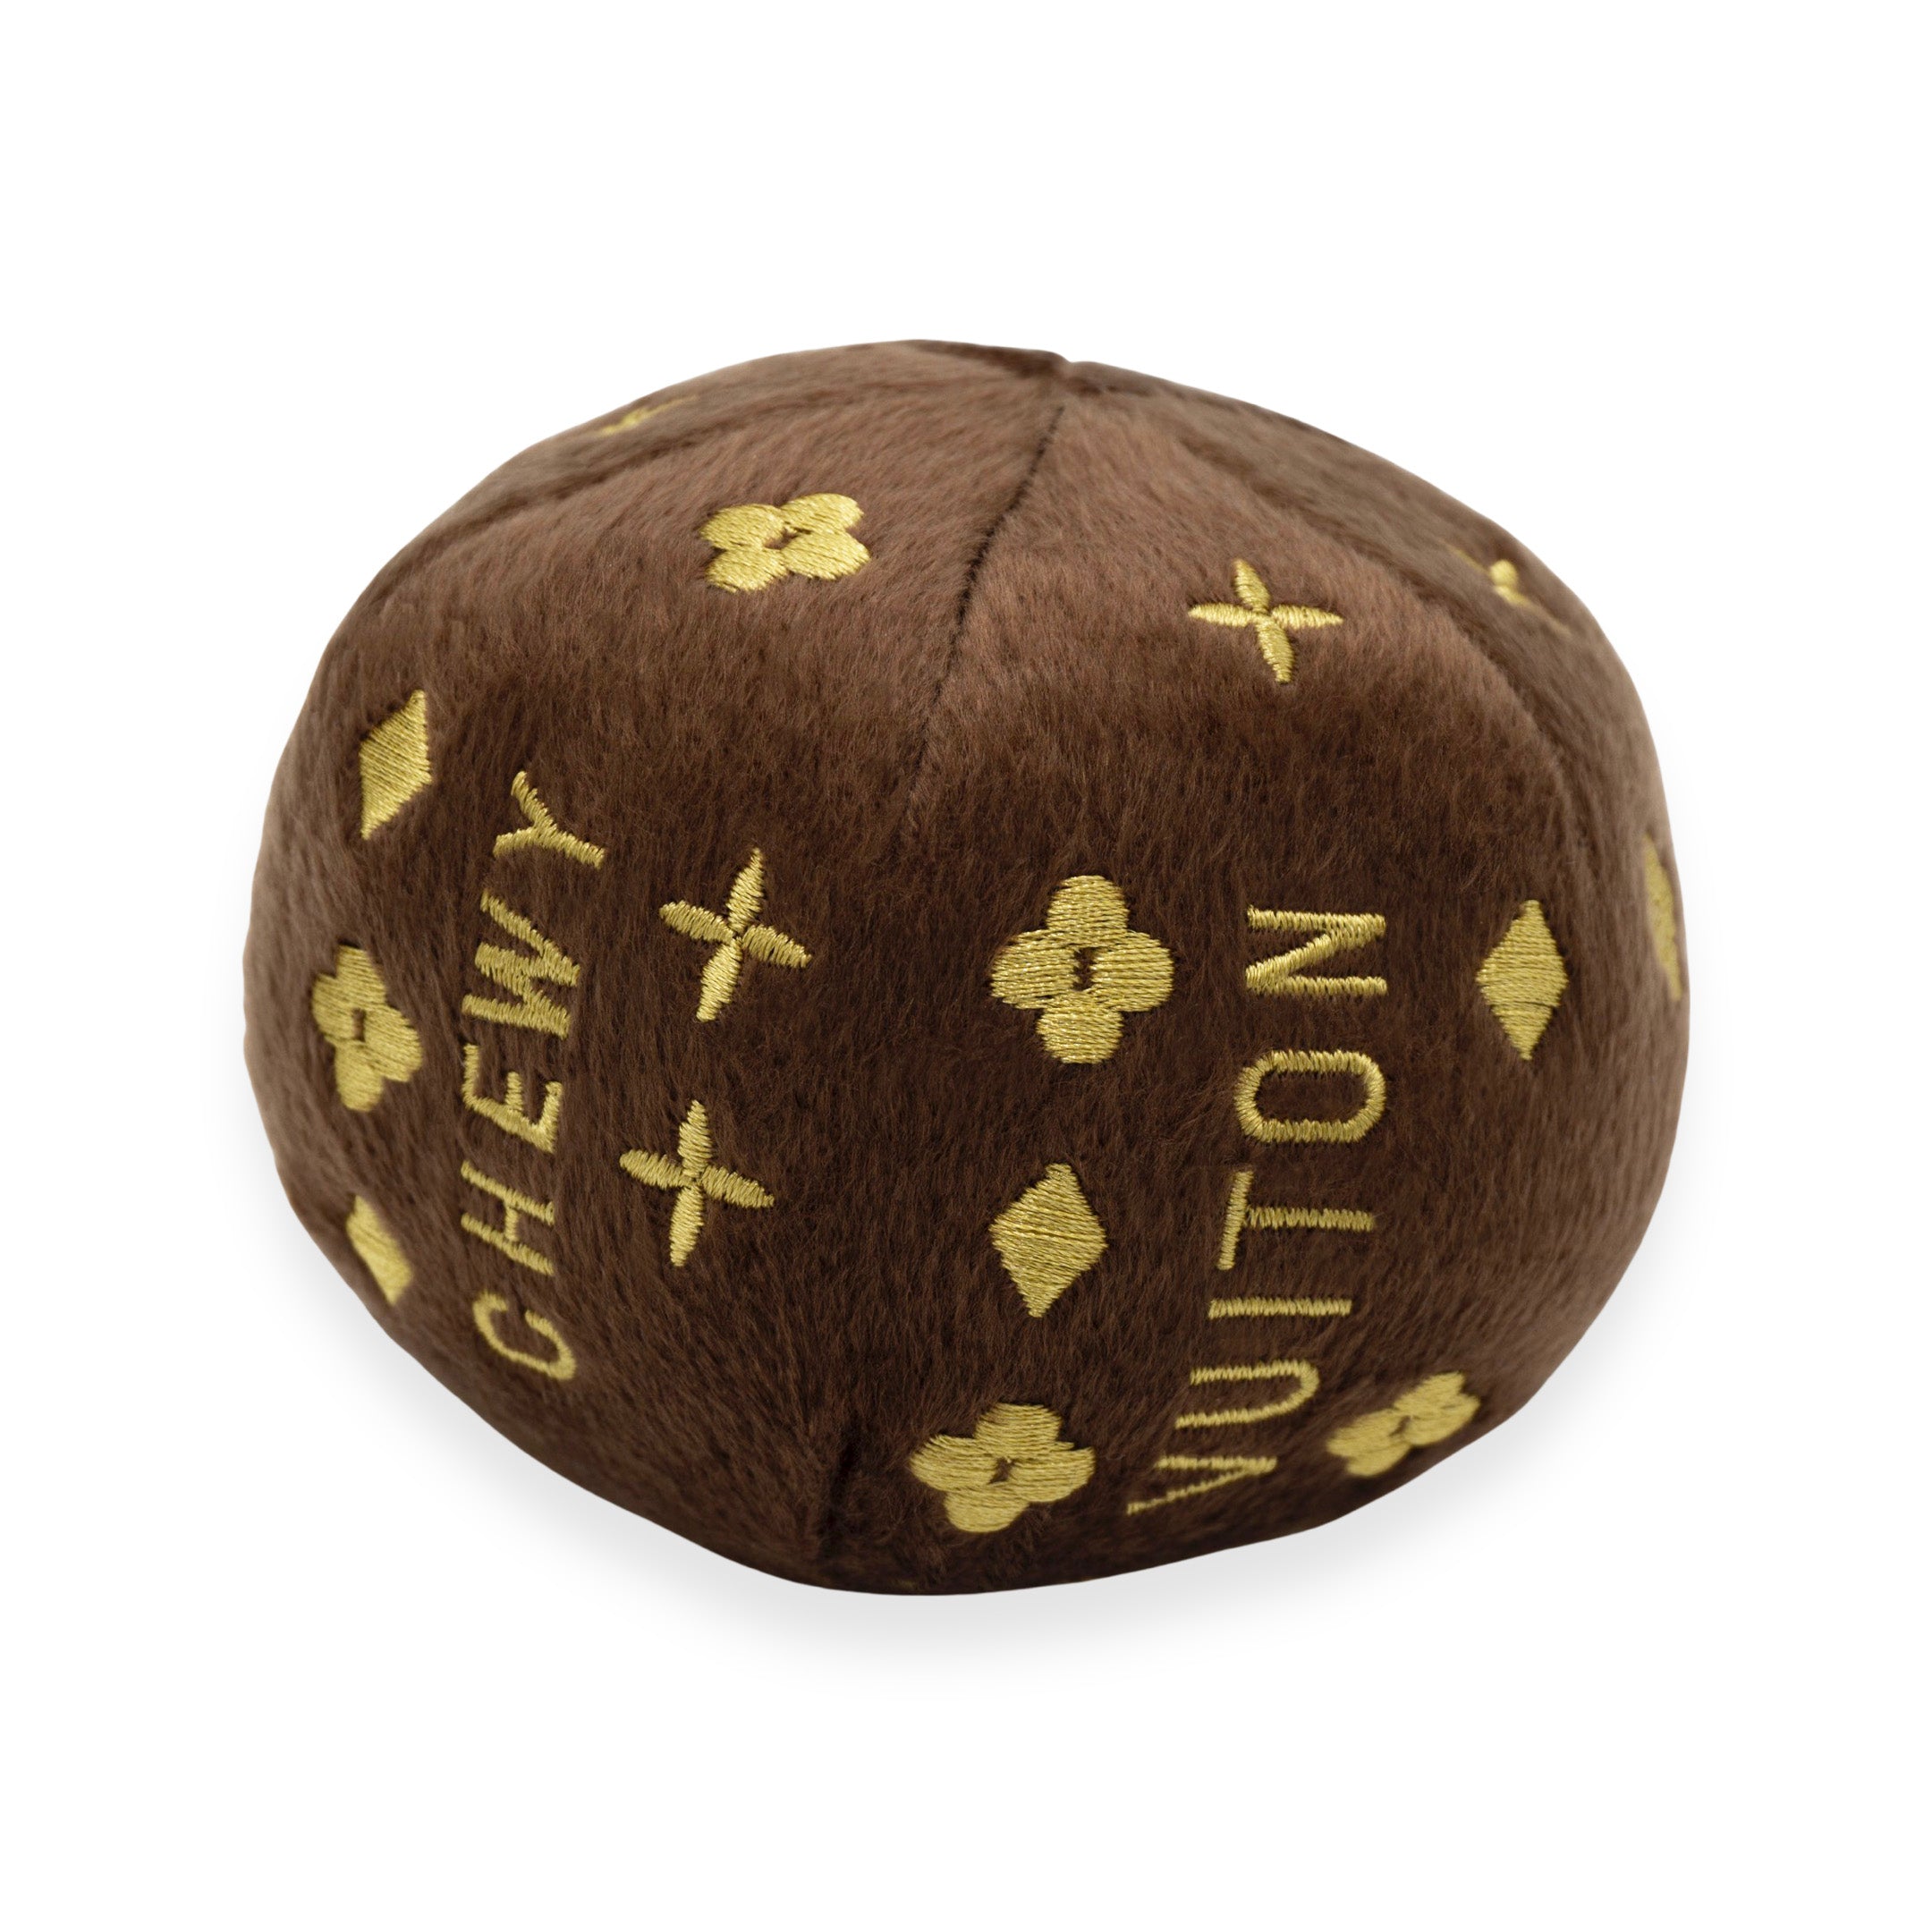 Chewy Vuiton Ball - Brown